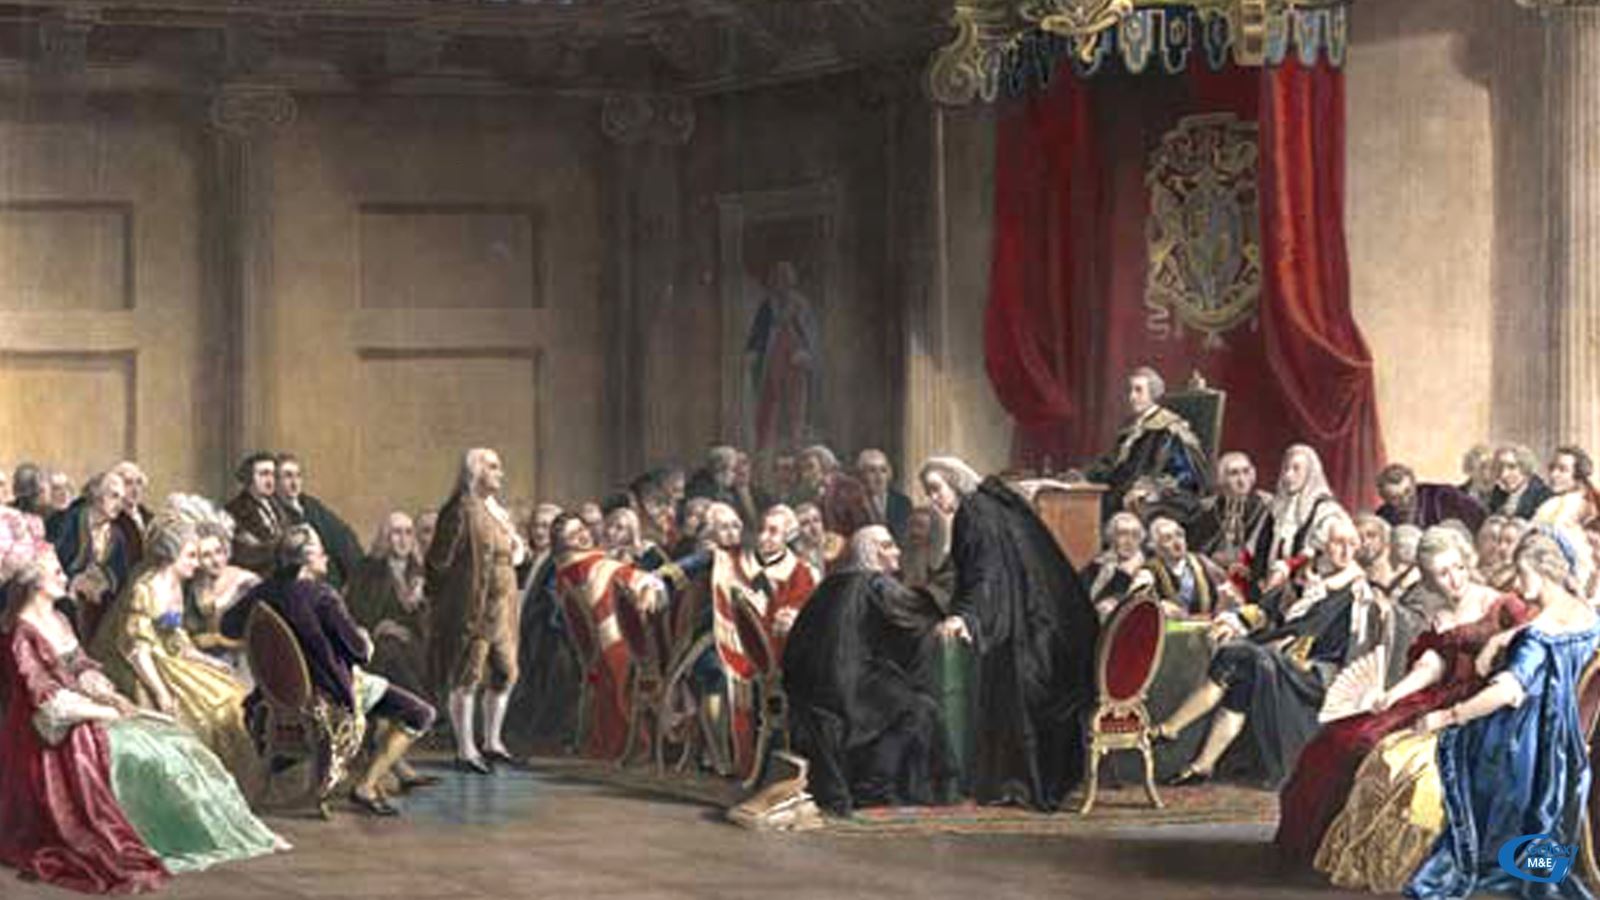 The painting depicts Benjamin Franklin in England in 1774. Before the American revolution broke out, he did his best to convince the British colonies.